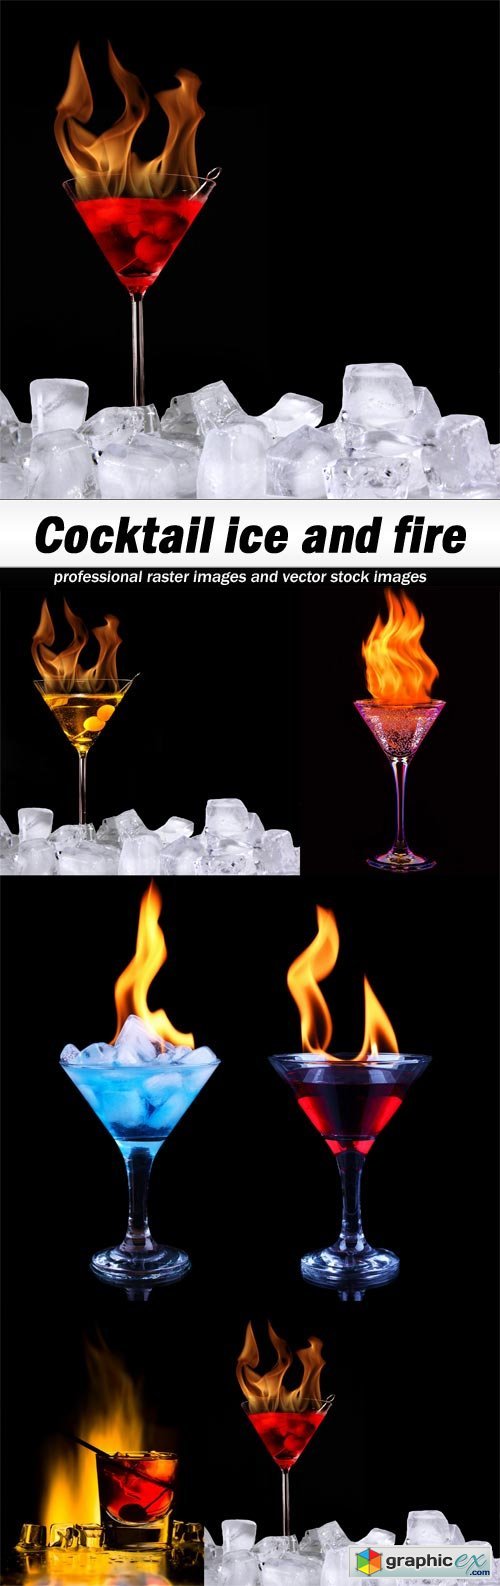 Cocktail ice and fire